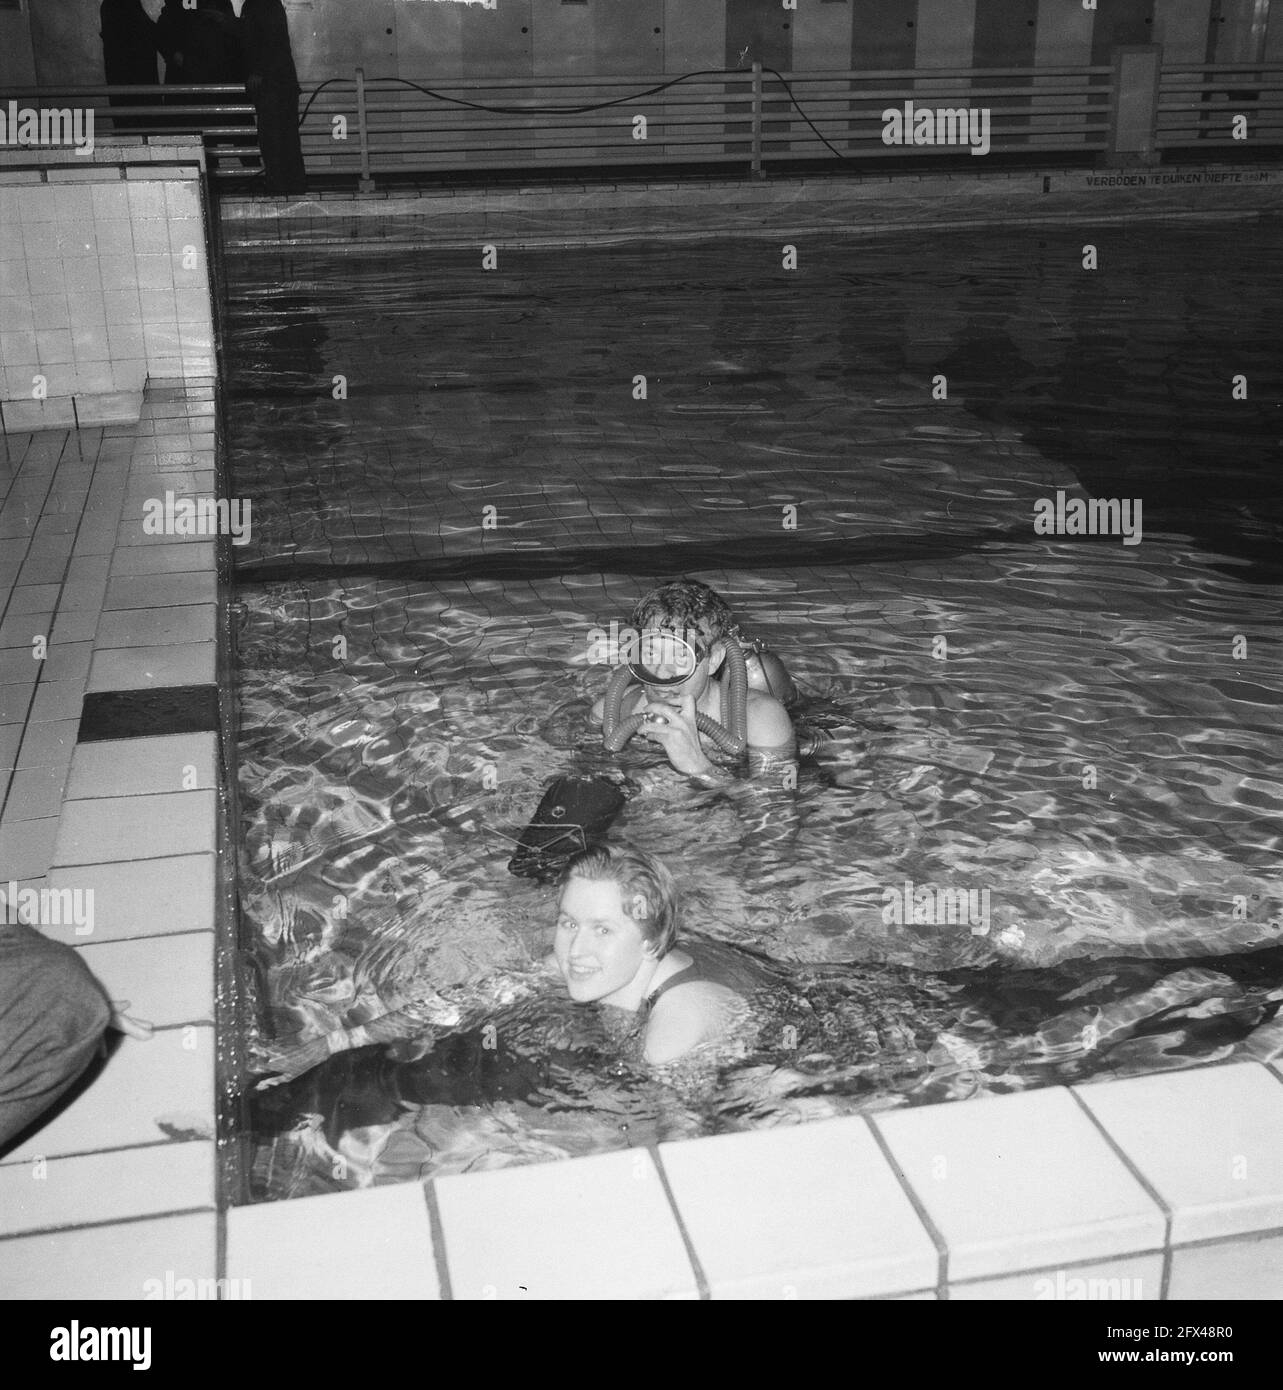 Recording in the swimming stadium in Naarden for Eurovision film Marian Heemskerk in the water, January 5, 1961, The Netherlands, 20th century press agency photo, news to remember, documentary, historic photography 1945-1990, visual stories, human history of the Twentieth Century, capturing moments in time Stock Photo